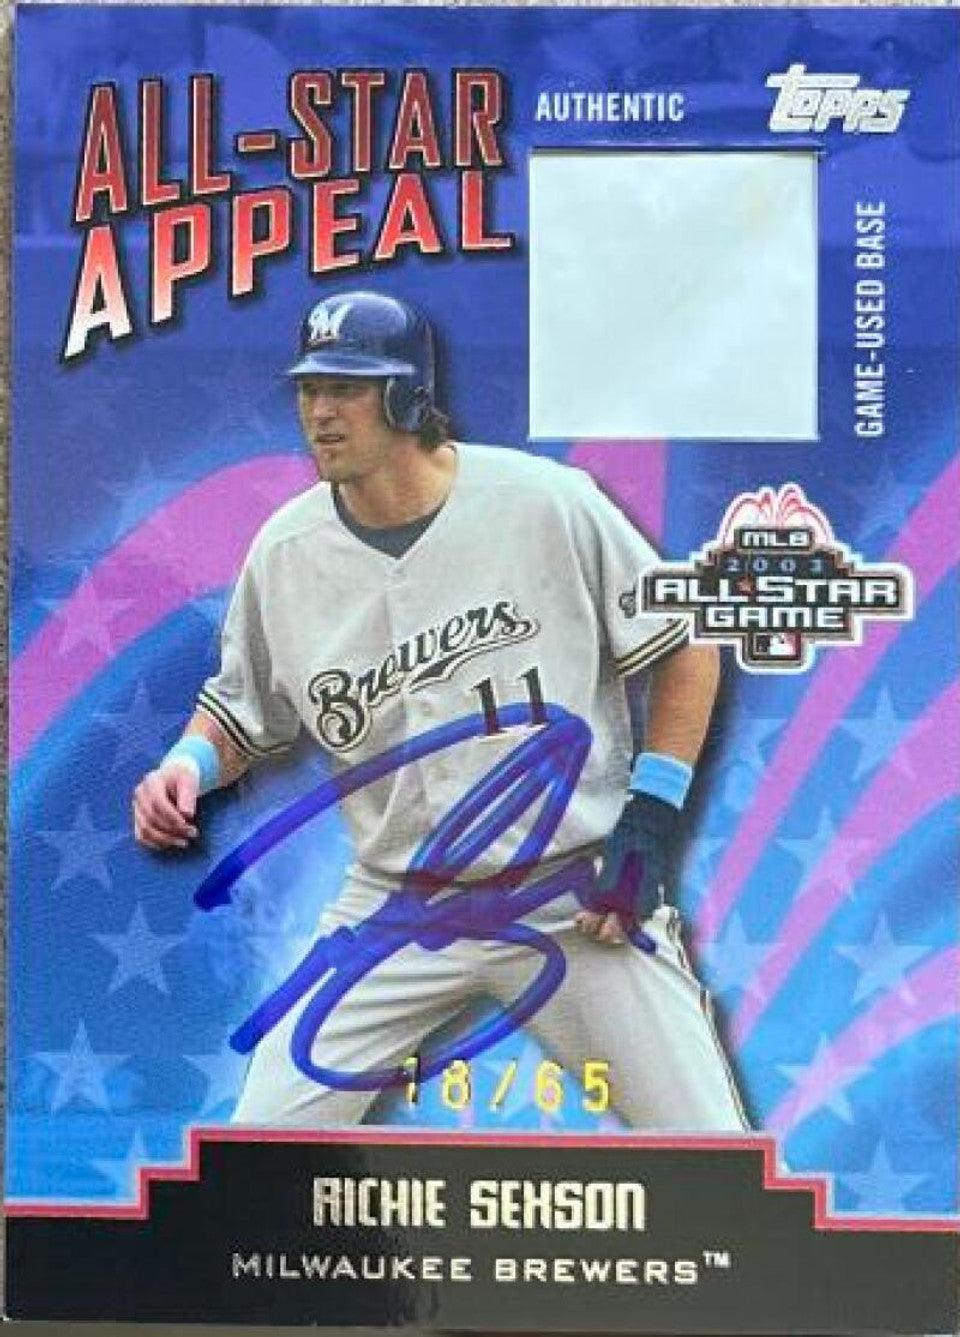 Richie Sexson Signed 2004 Topps All-Star Appeal Relics Baseball Card - Milwaukee Brewers - PastPros